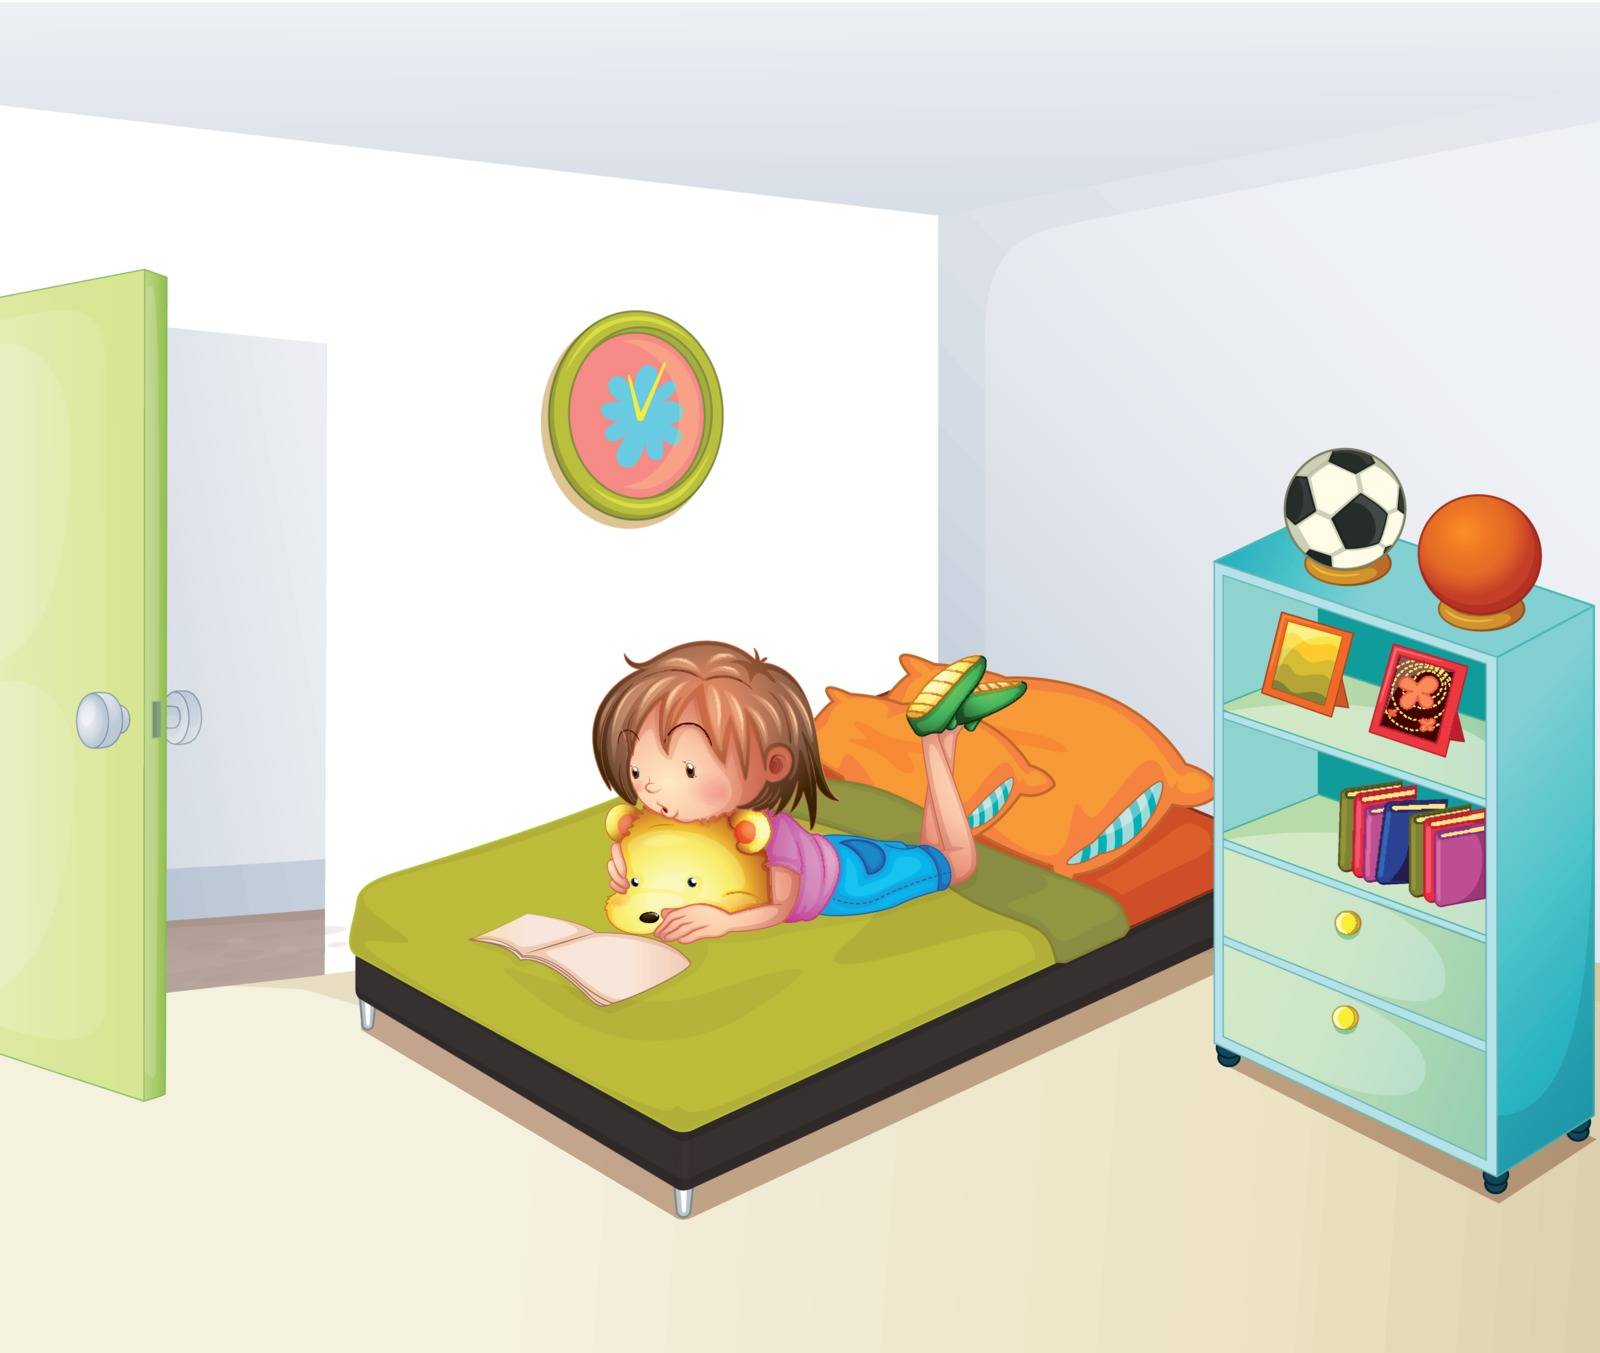 Illustration of a girl studying in her clean bedroom